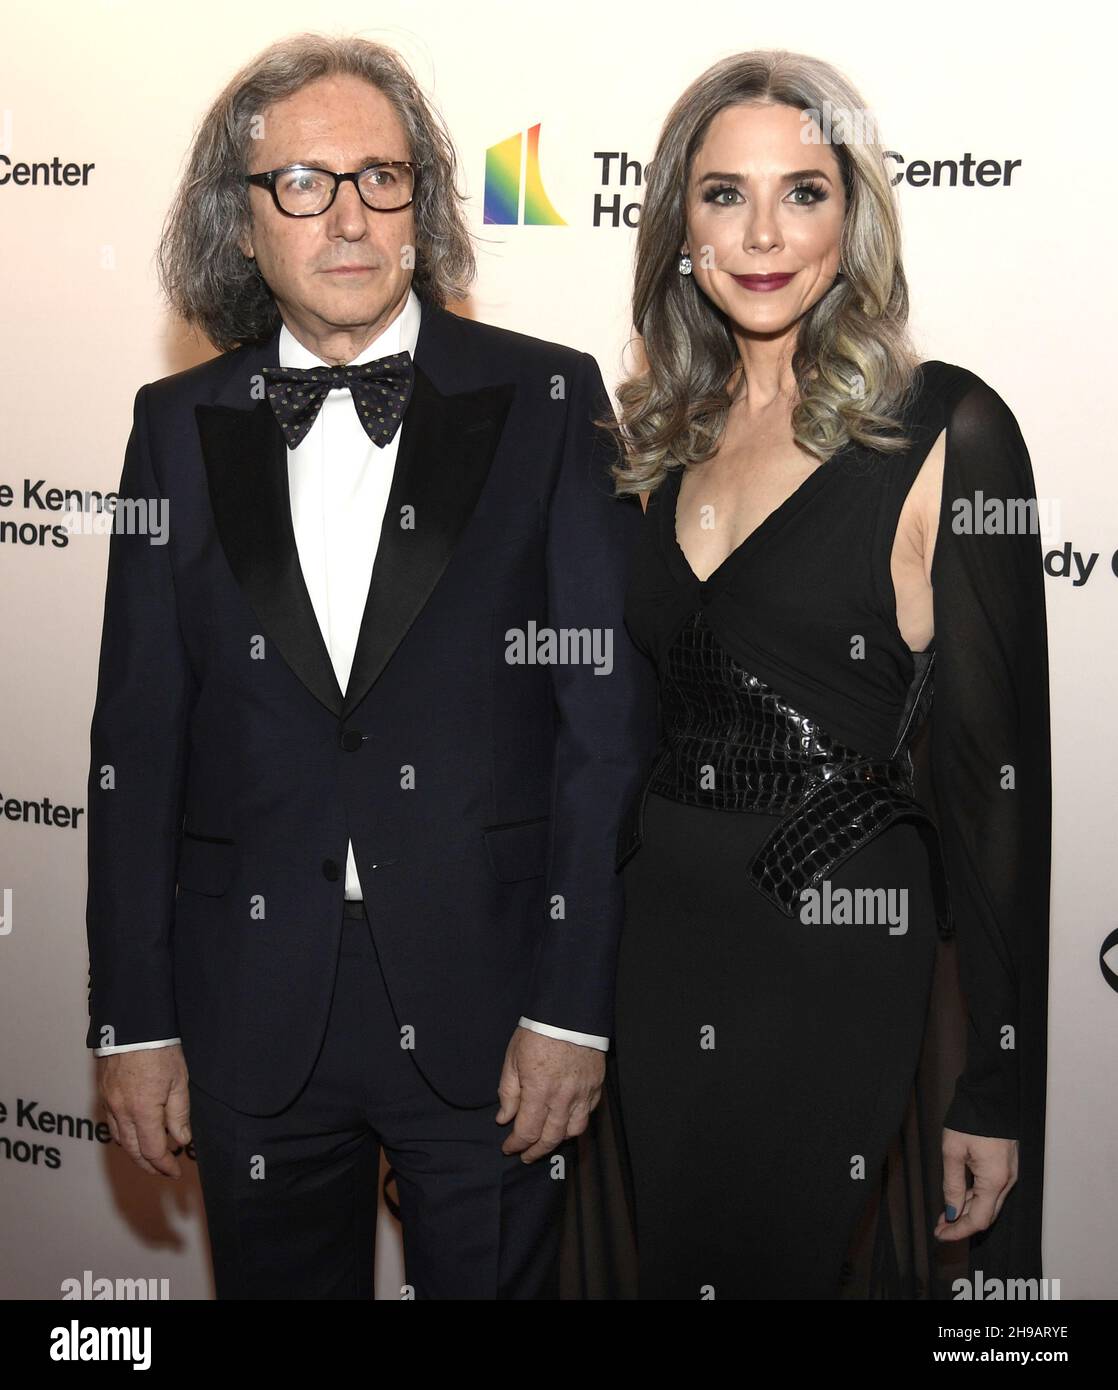 Washington, United States. 05th Dec, 2021. Lobbyist Heather Podesta (R) and filmmaker Stephen Kessler pose for photographers as they arrive for the 2021 Kennedy Center Honors gala evening in Washington, Sunday, December 5, 2021. The Honors are given annually to those in the performing arts for their lifetime of contributions to American culture. Photo by Mike Theiler/UPI Credit: UPI/Alamy Live News Stock Photo